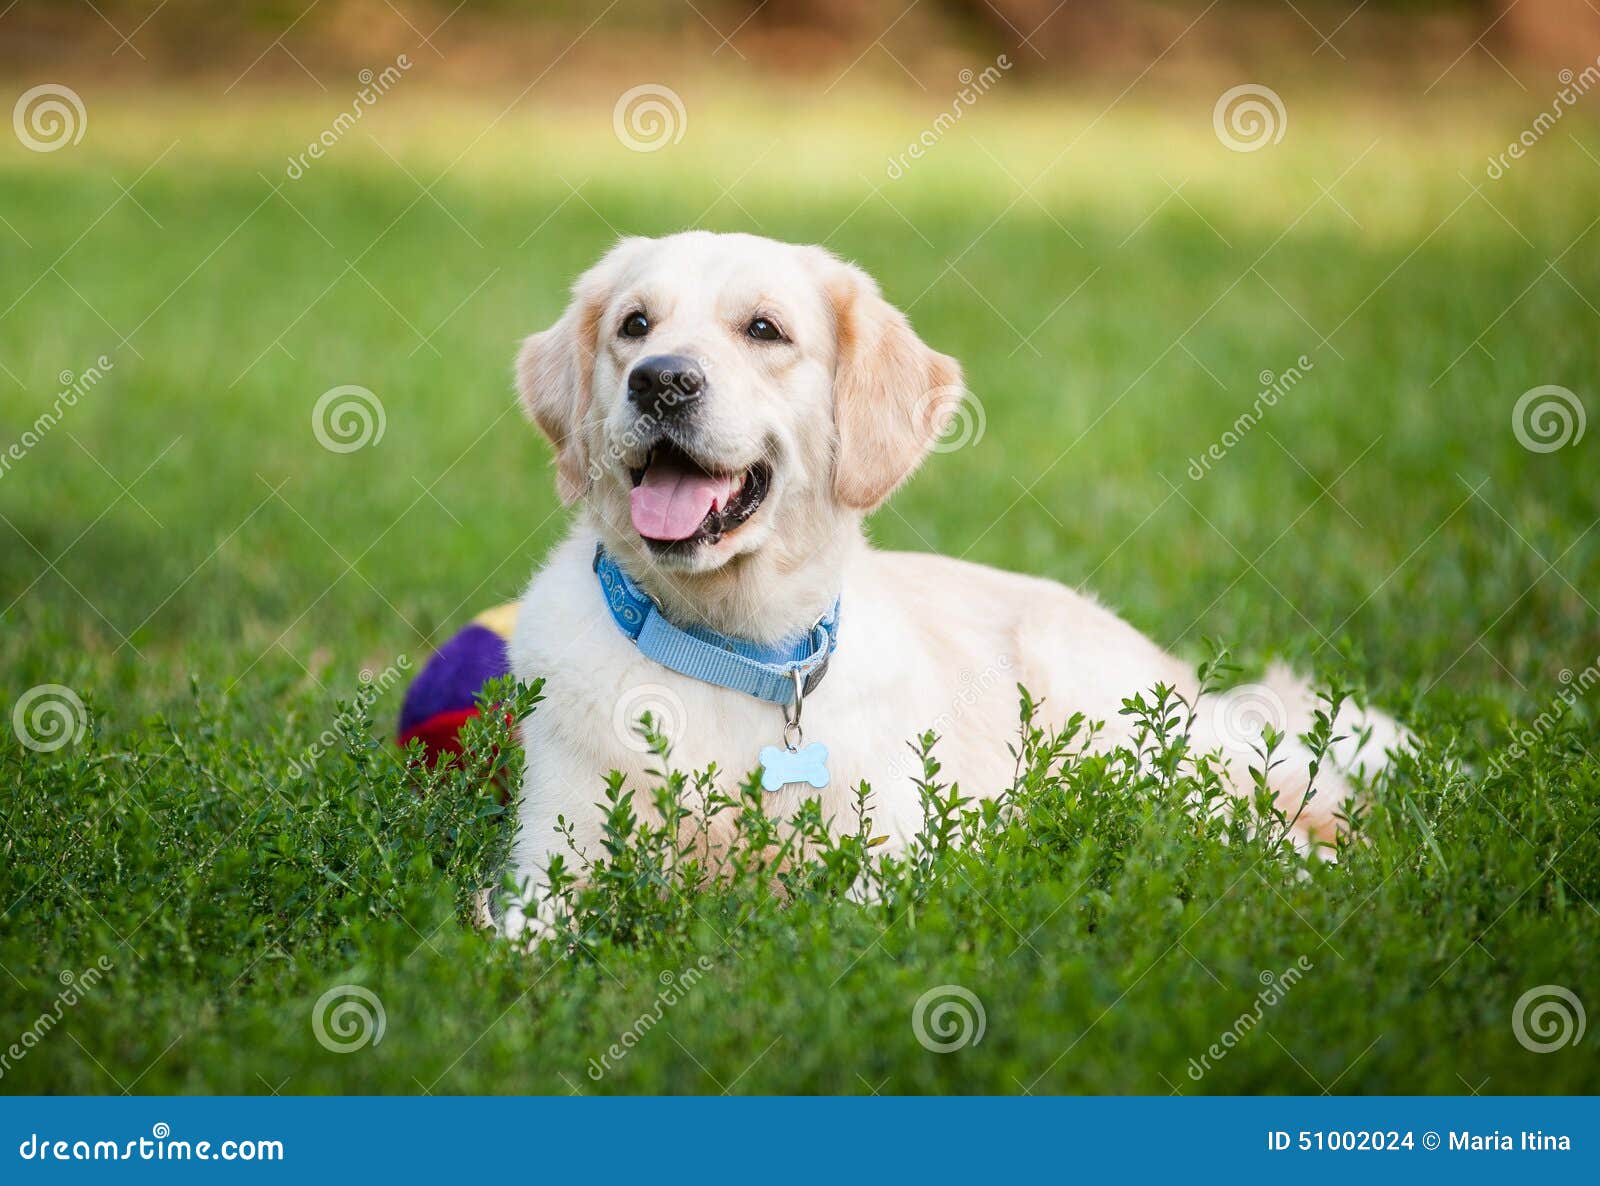 Golden retriever laying on grass and smiling